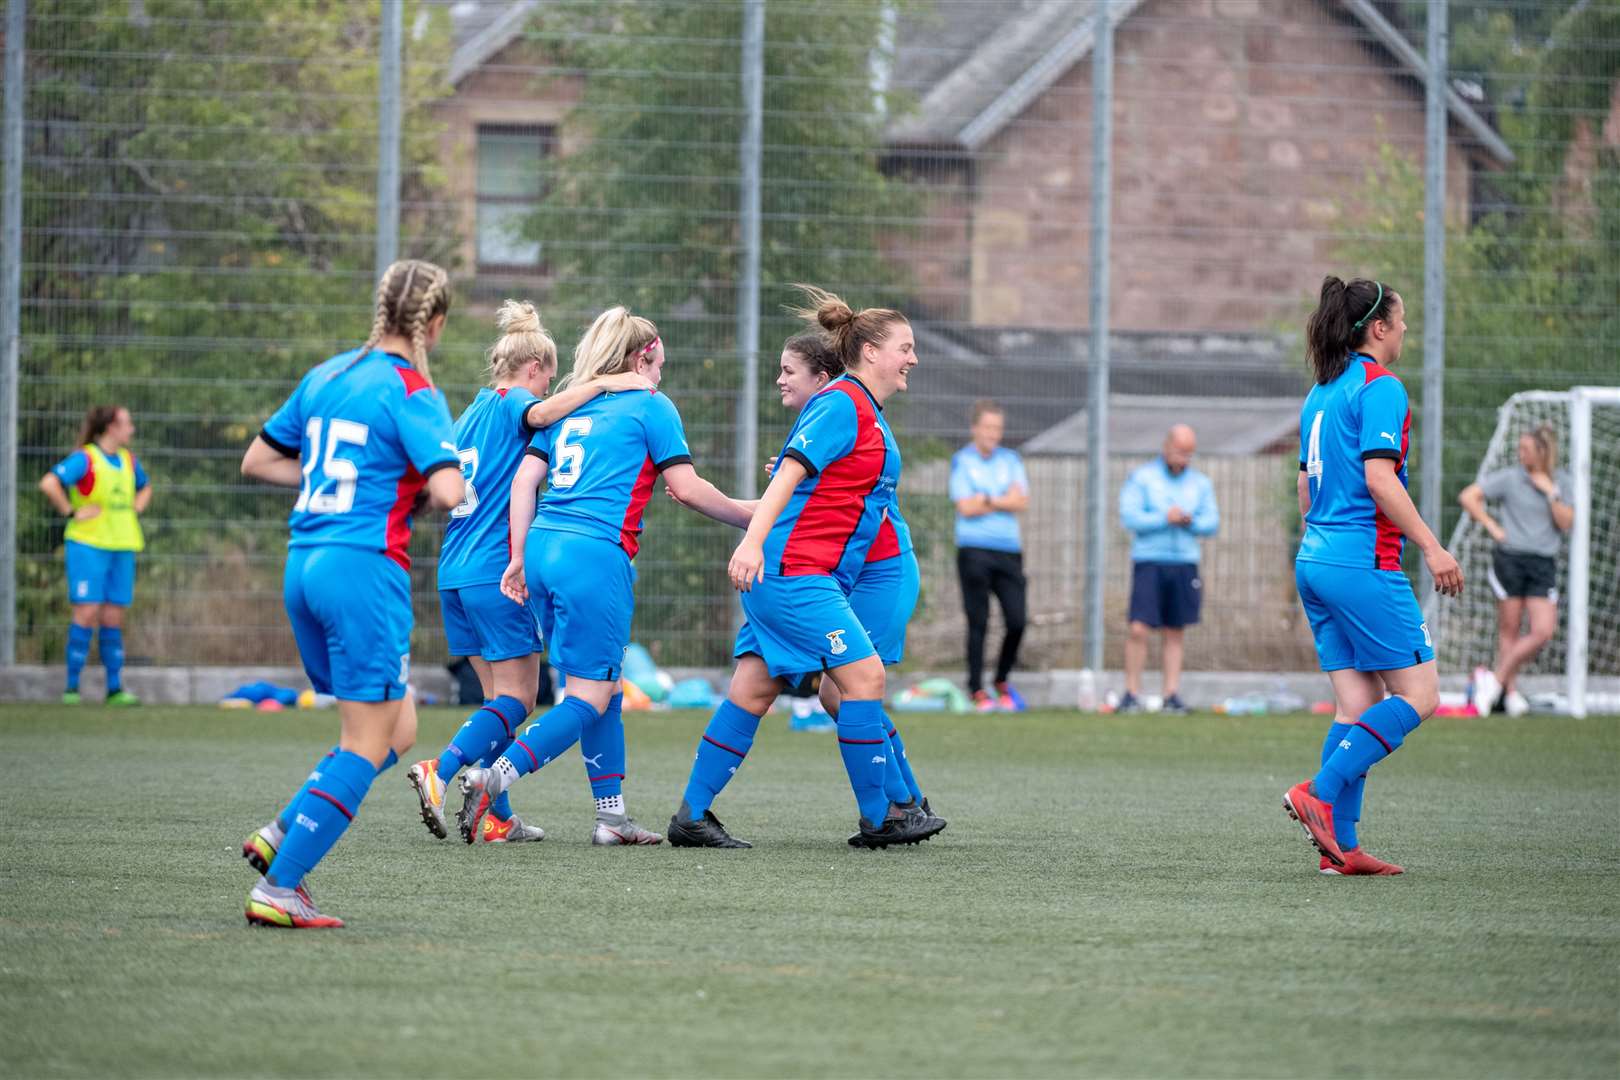 Inverness Caledonian Thistle Women fielded an ineligible player.